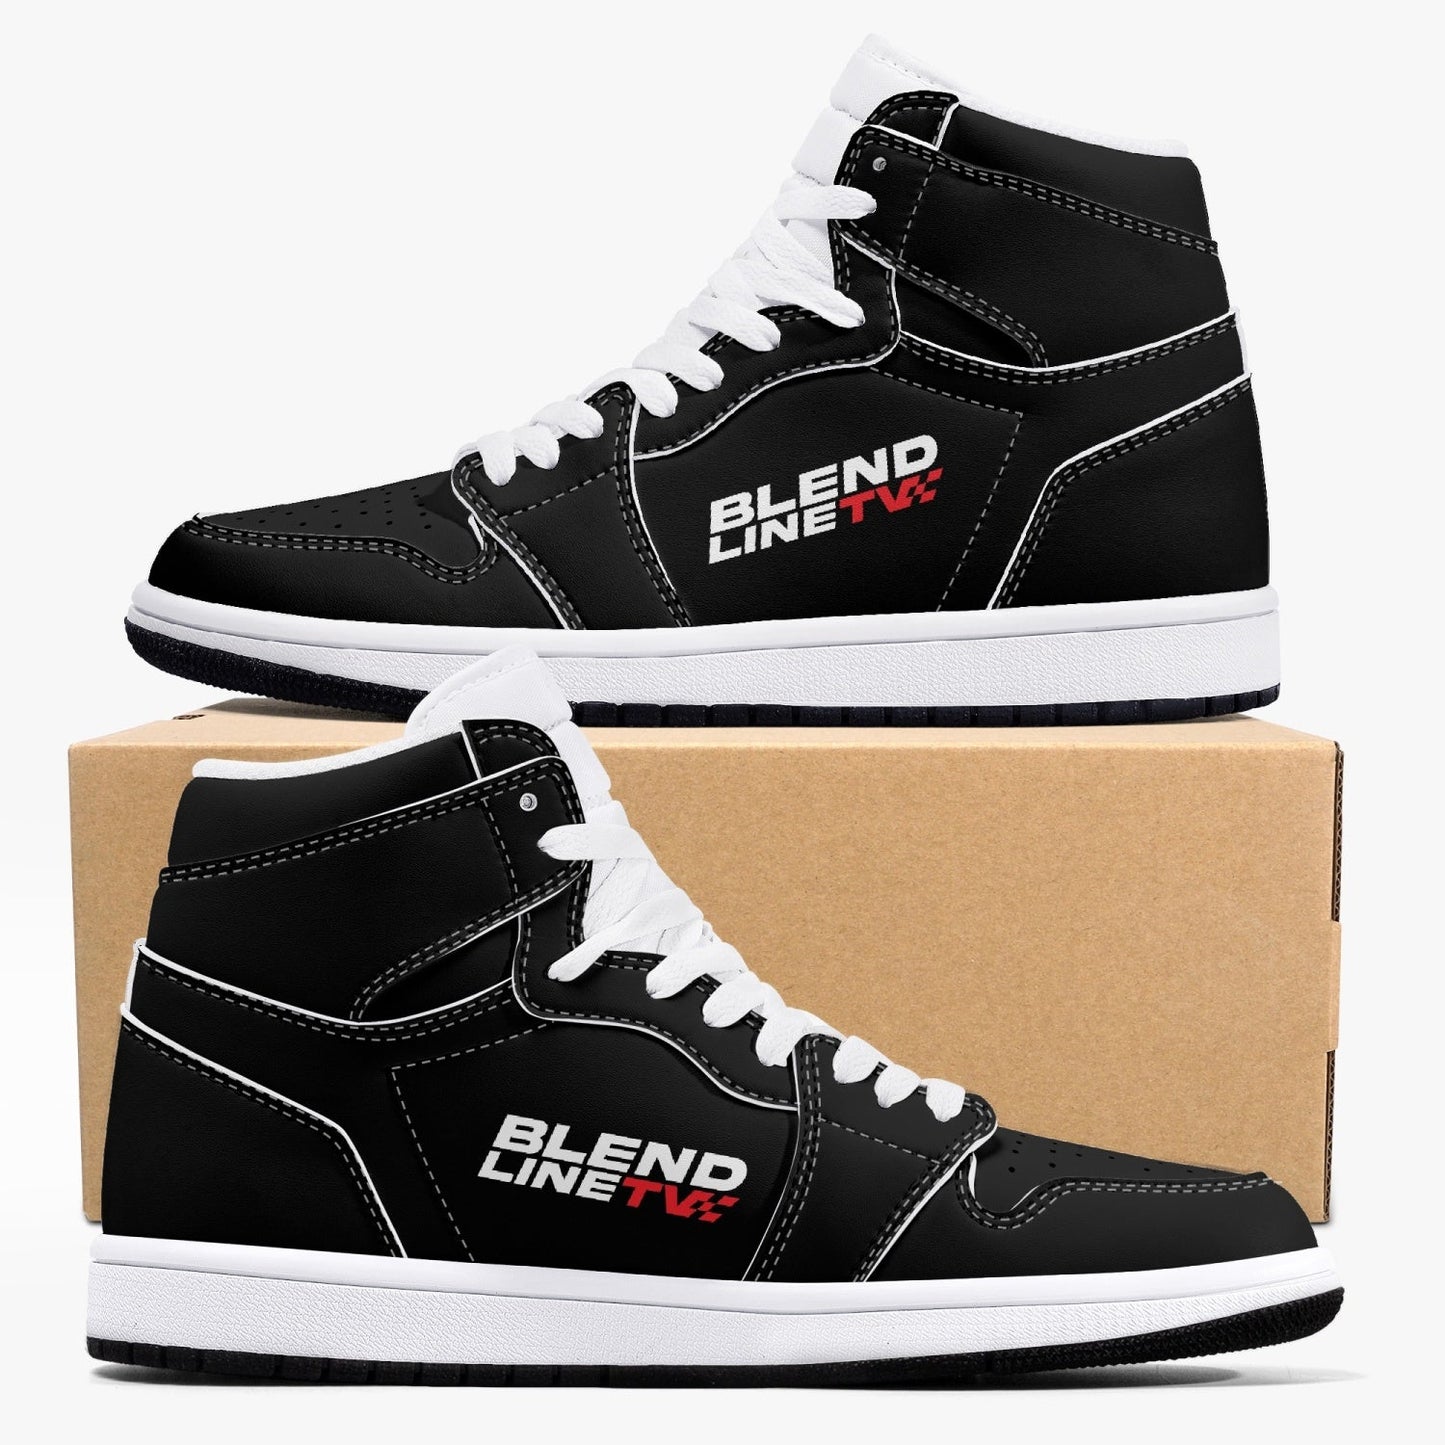 BLENDLINE TV High-Top Leather Sneakers - white